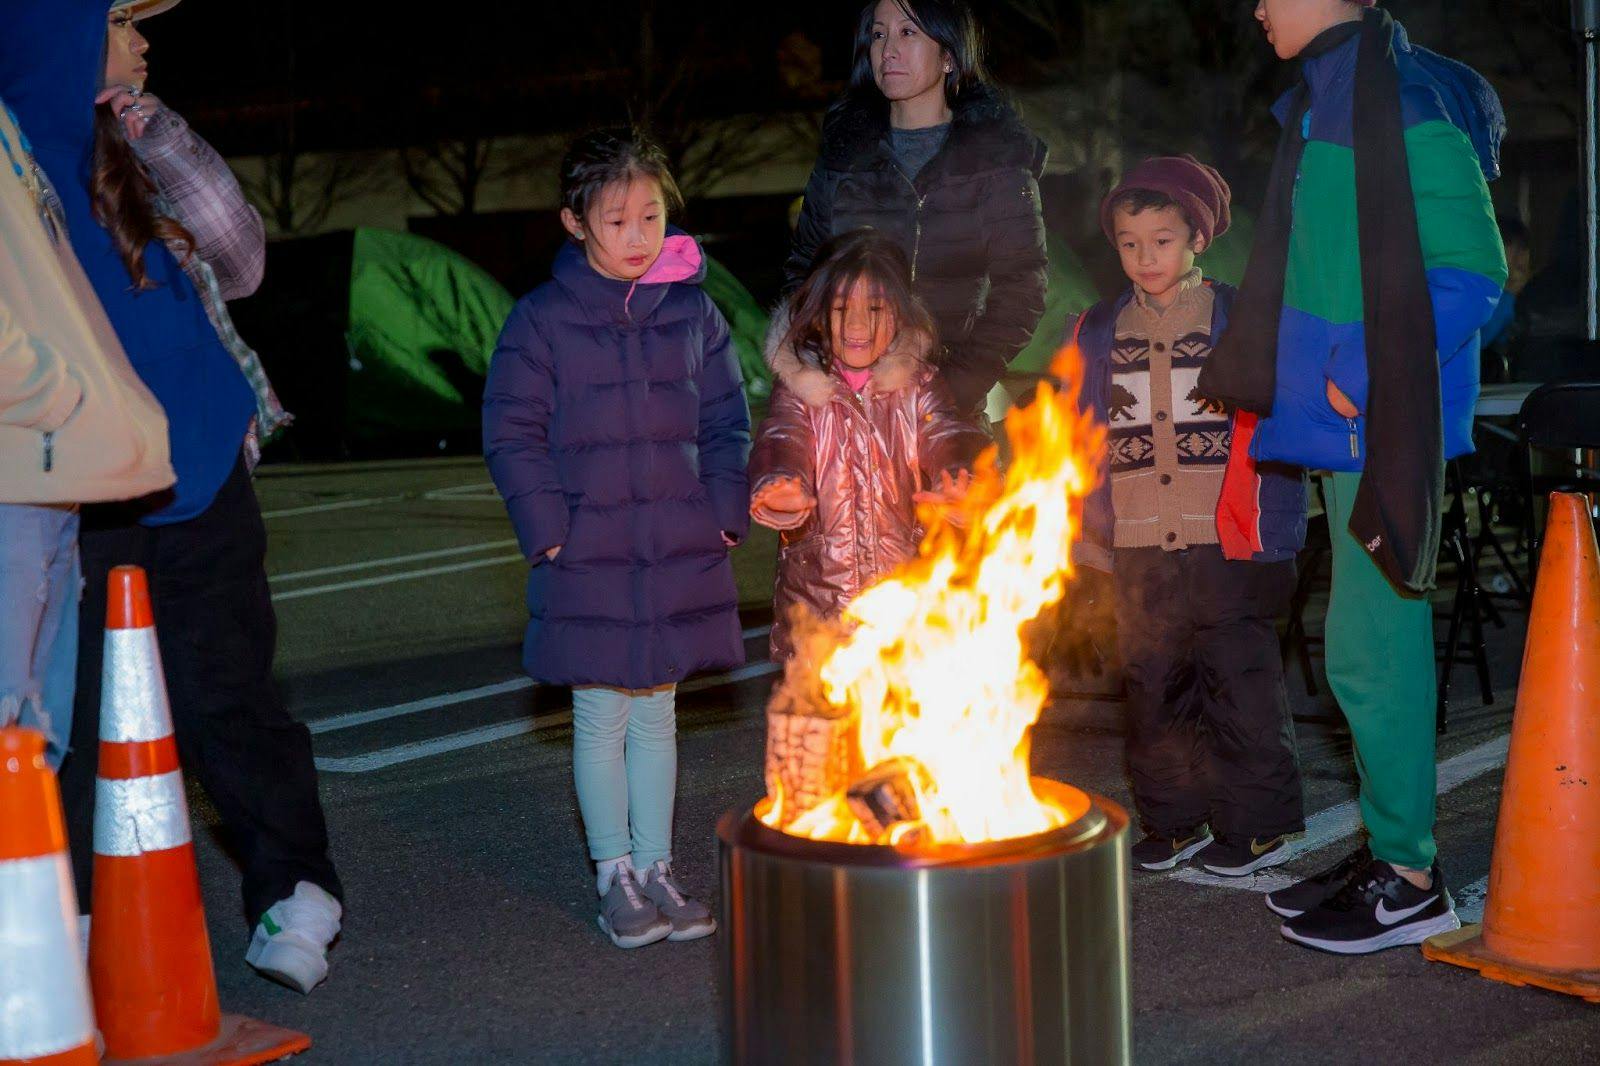 A group of children and adults gathers around a fire in a barrel in an Eastern Mountain Sports parking lot. 